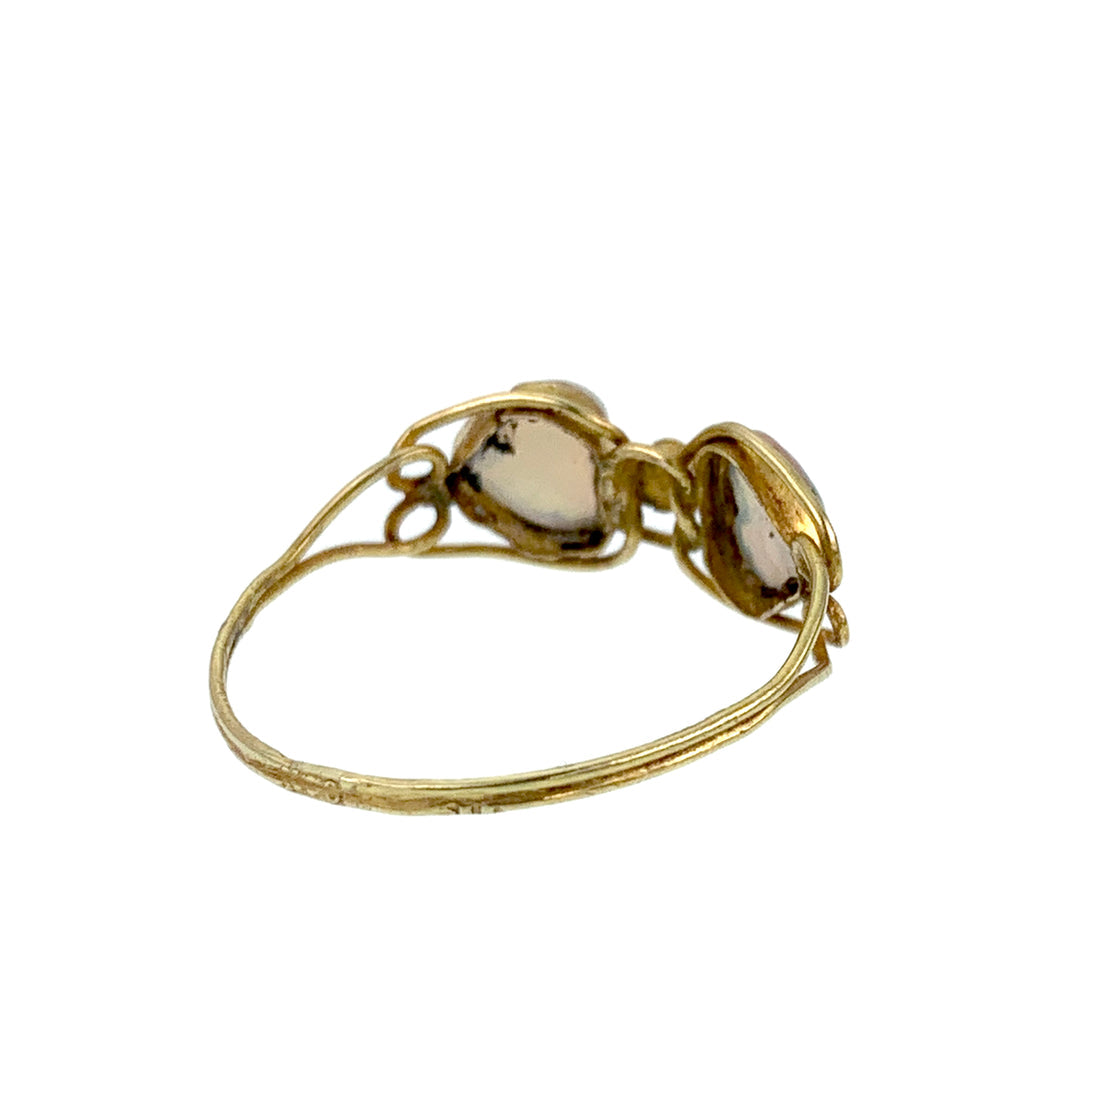 Delightful Victorian Double Heart Ring in 9ct